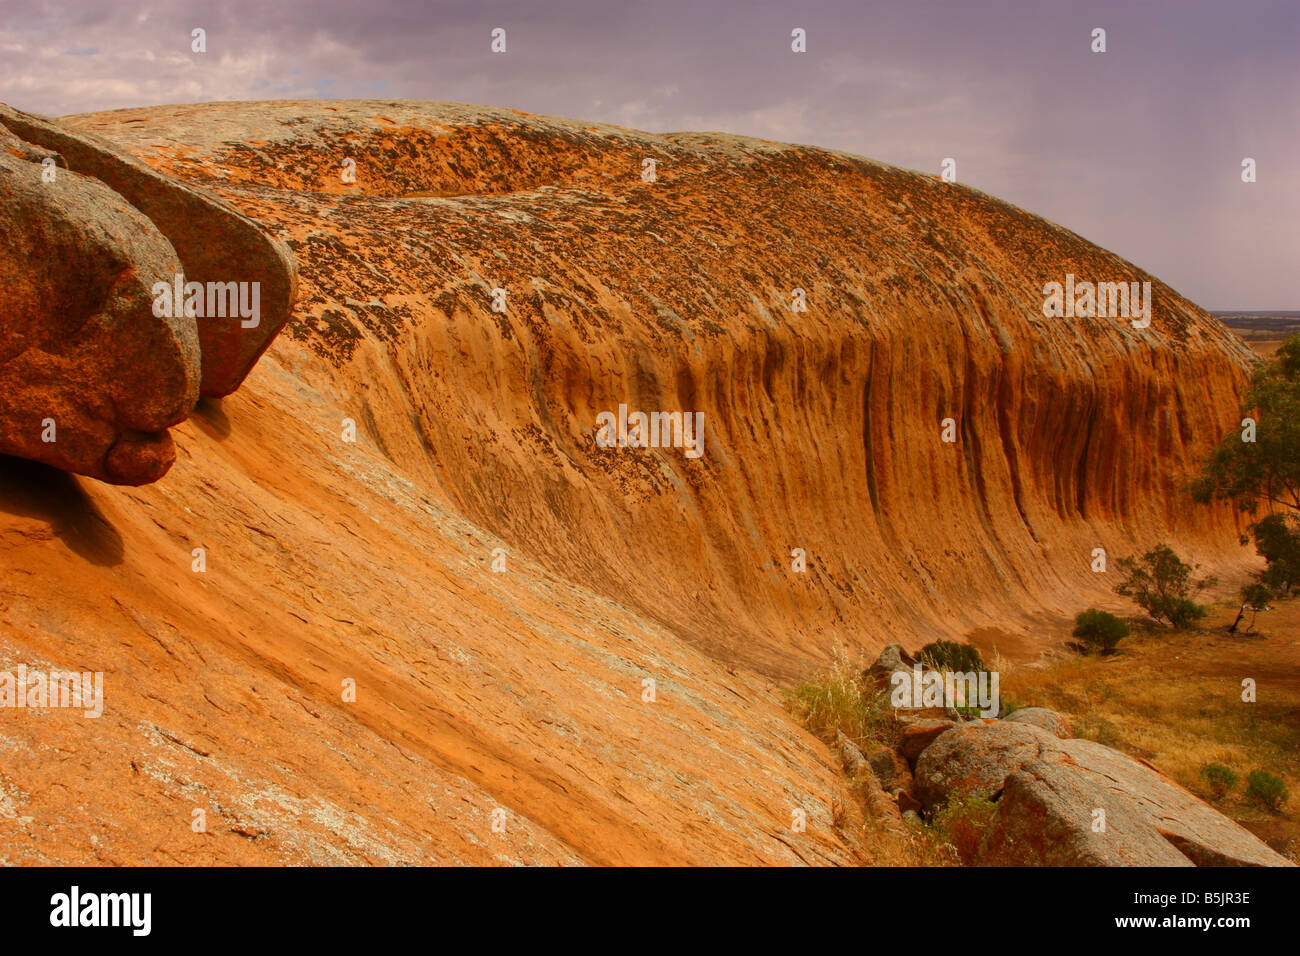 pildappa rock on the eyre penisula near the gawler ranges with high resolution photography Stock Photo